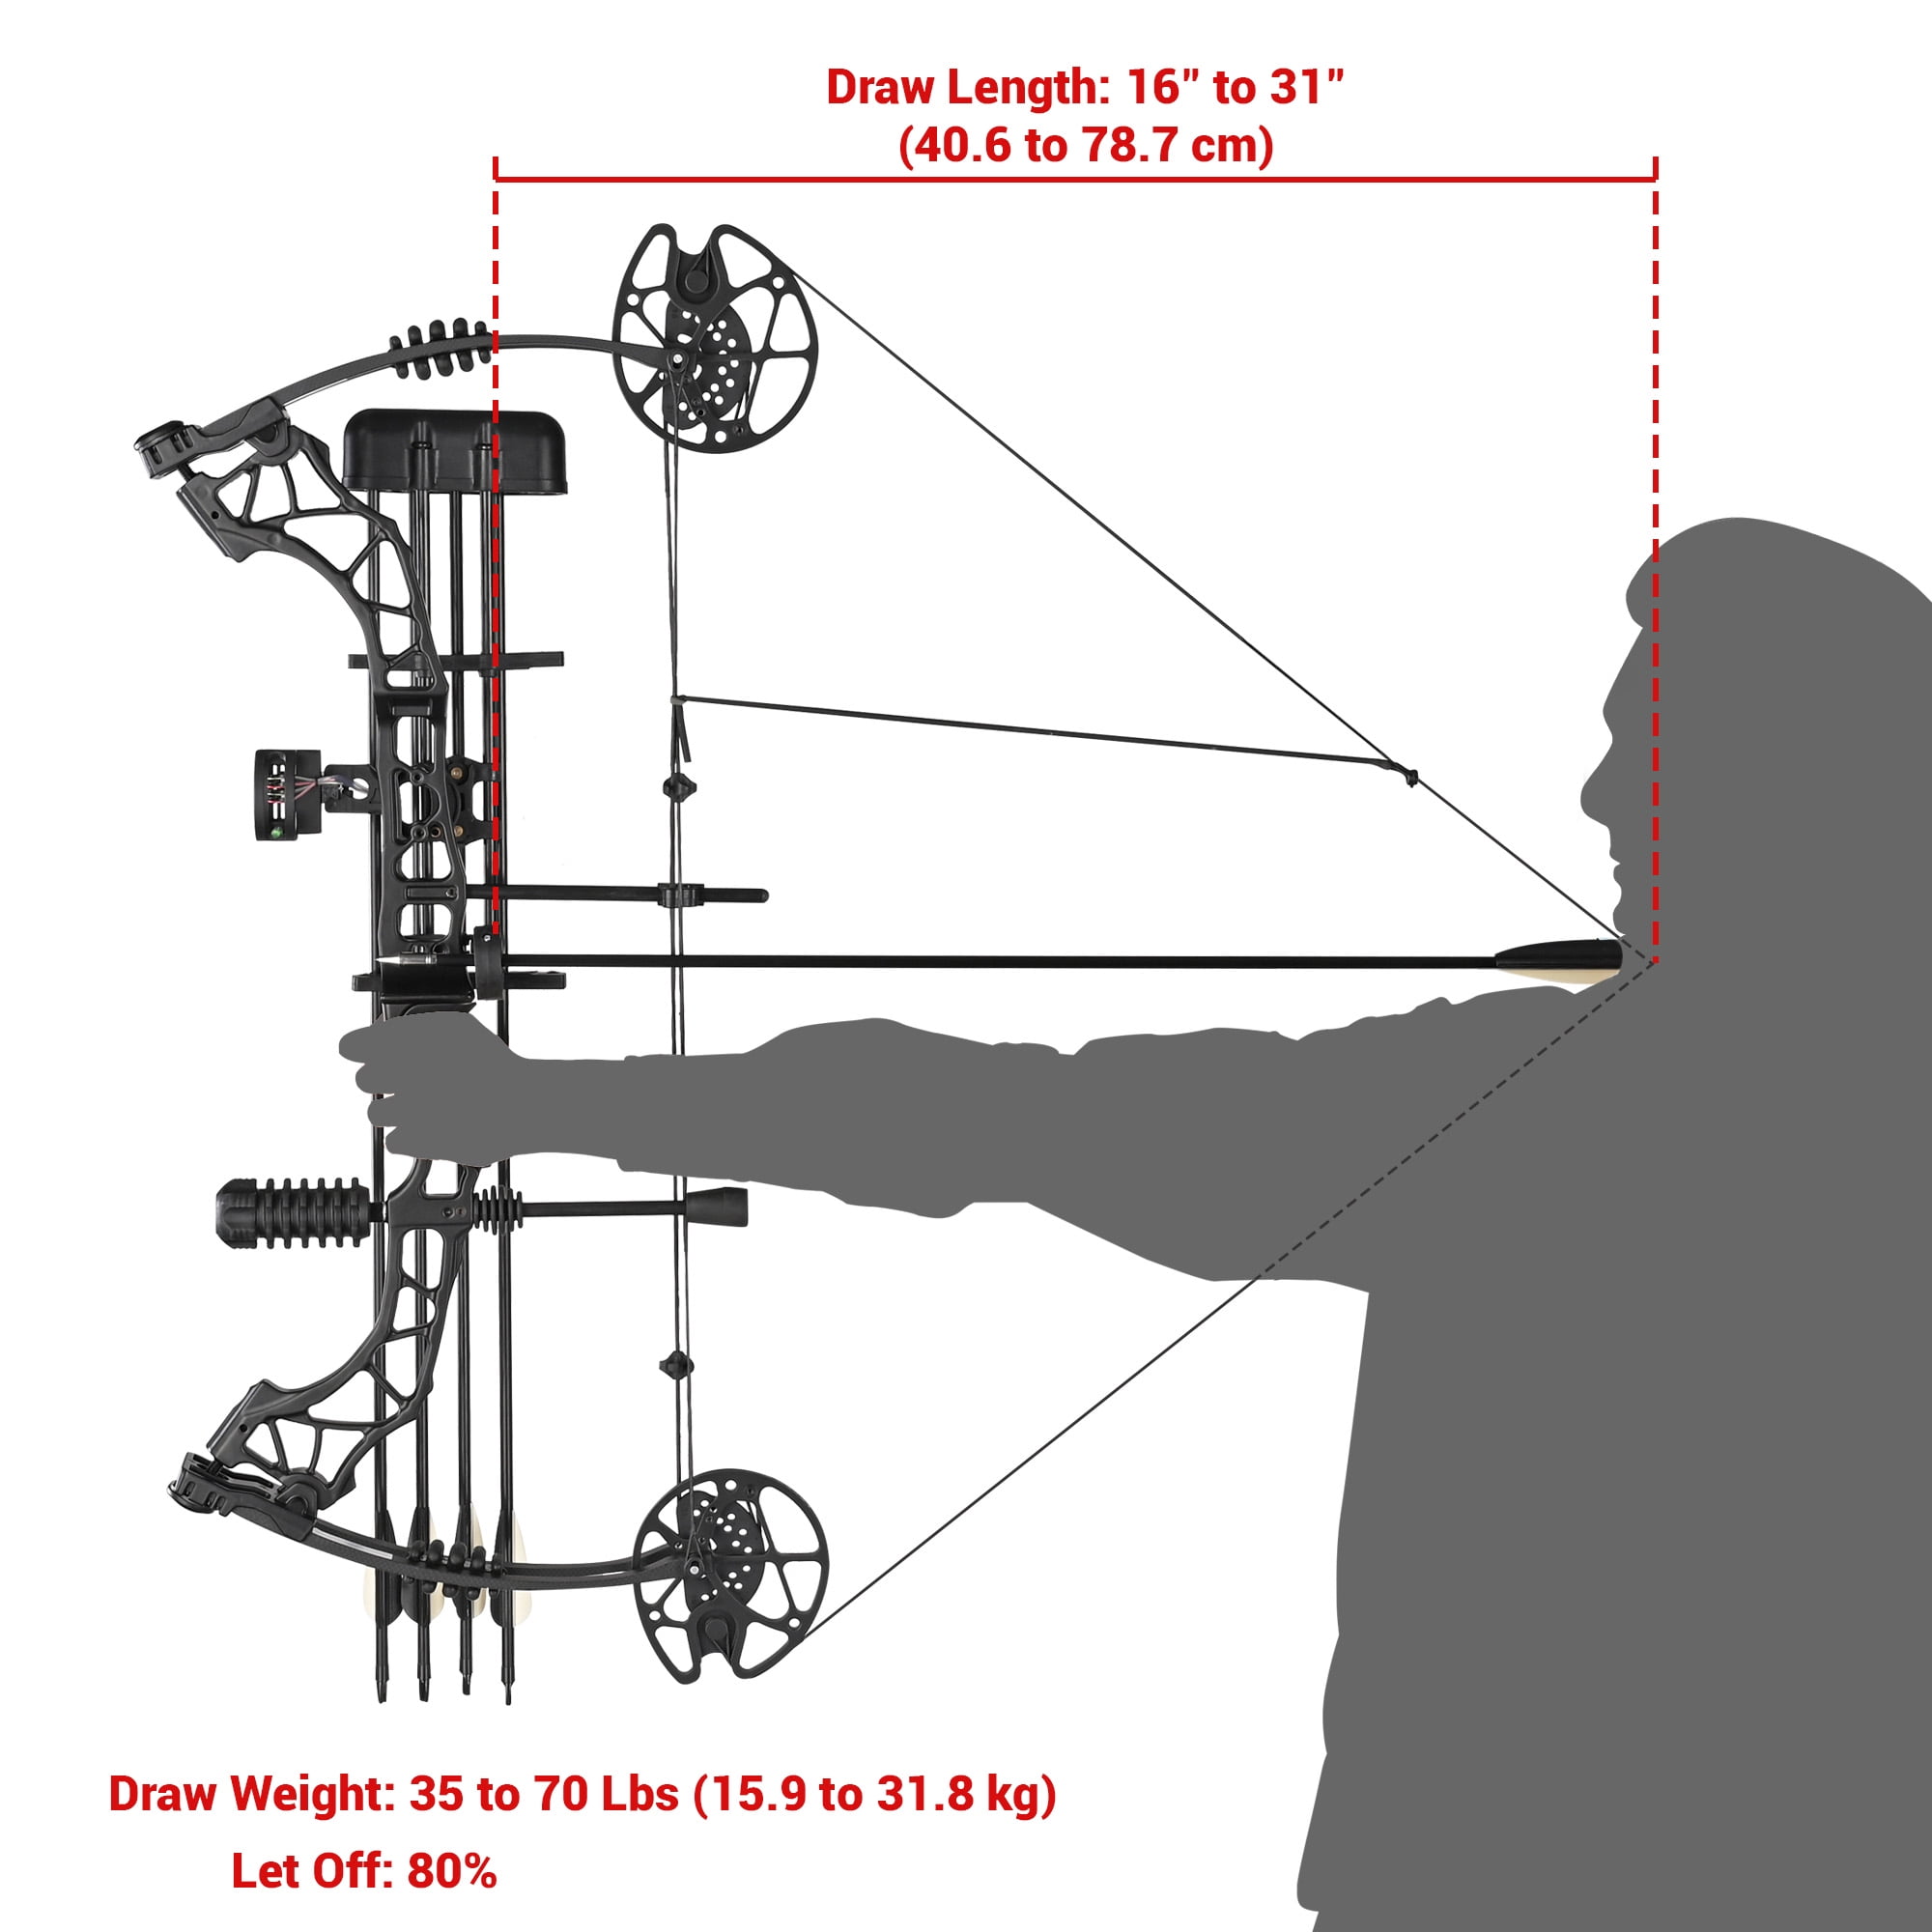 Pro Compound Right Hand Bow Kit Target Hunting Practice Arrows Archery 70 Lbs 